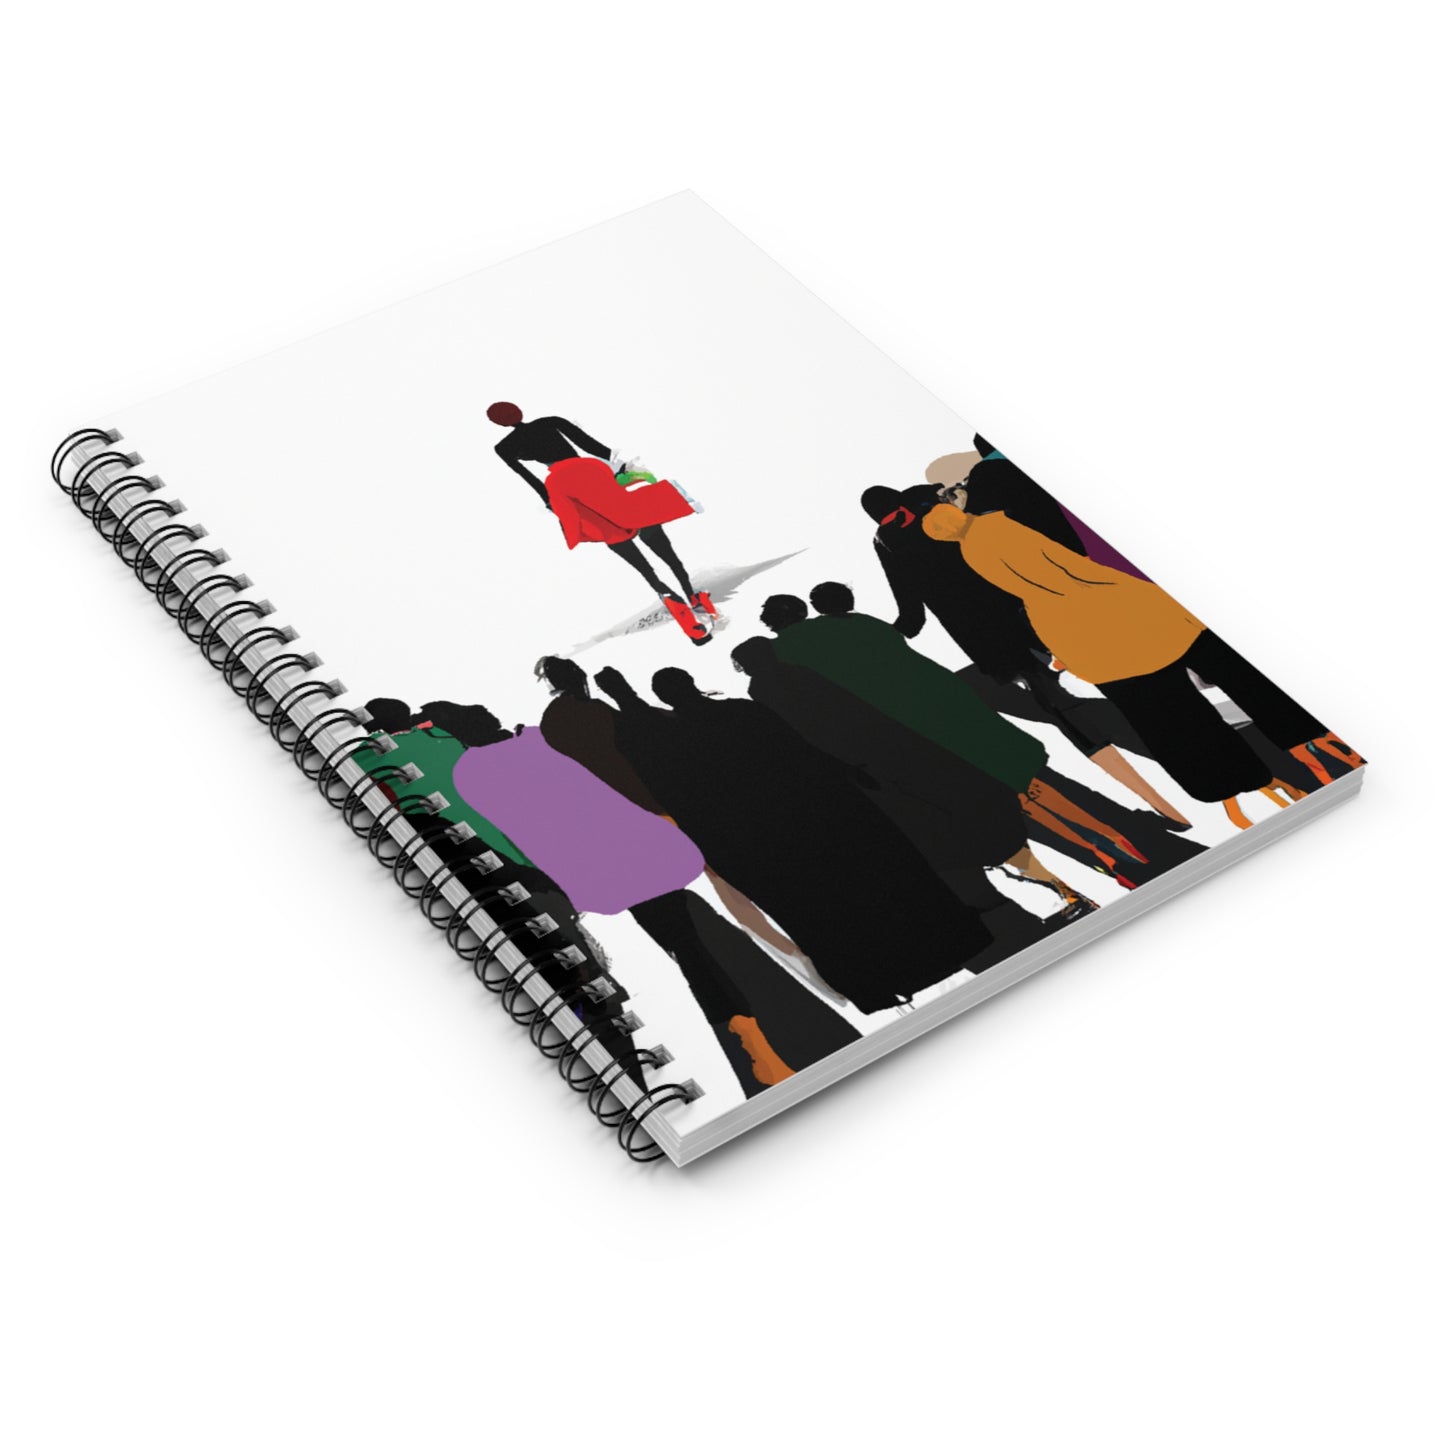 Stand Out - A Work Journal Notebook